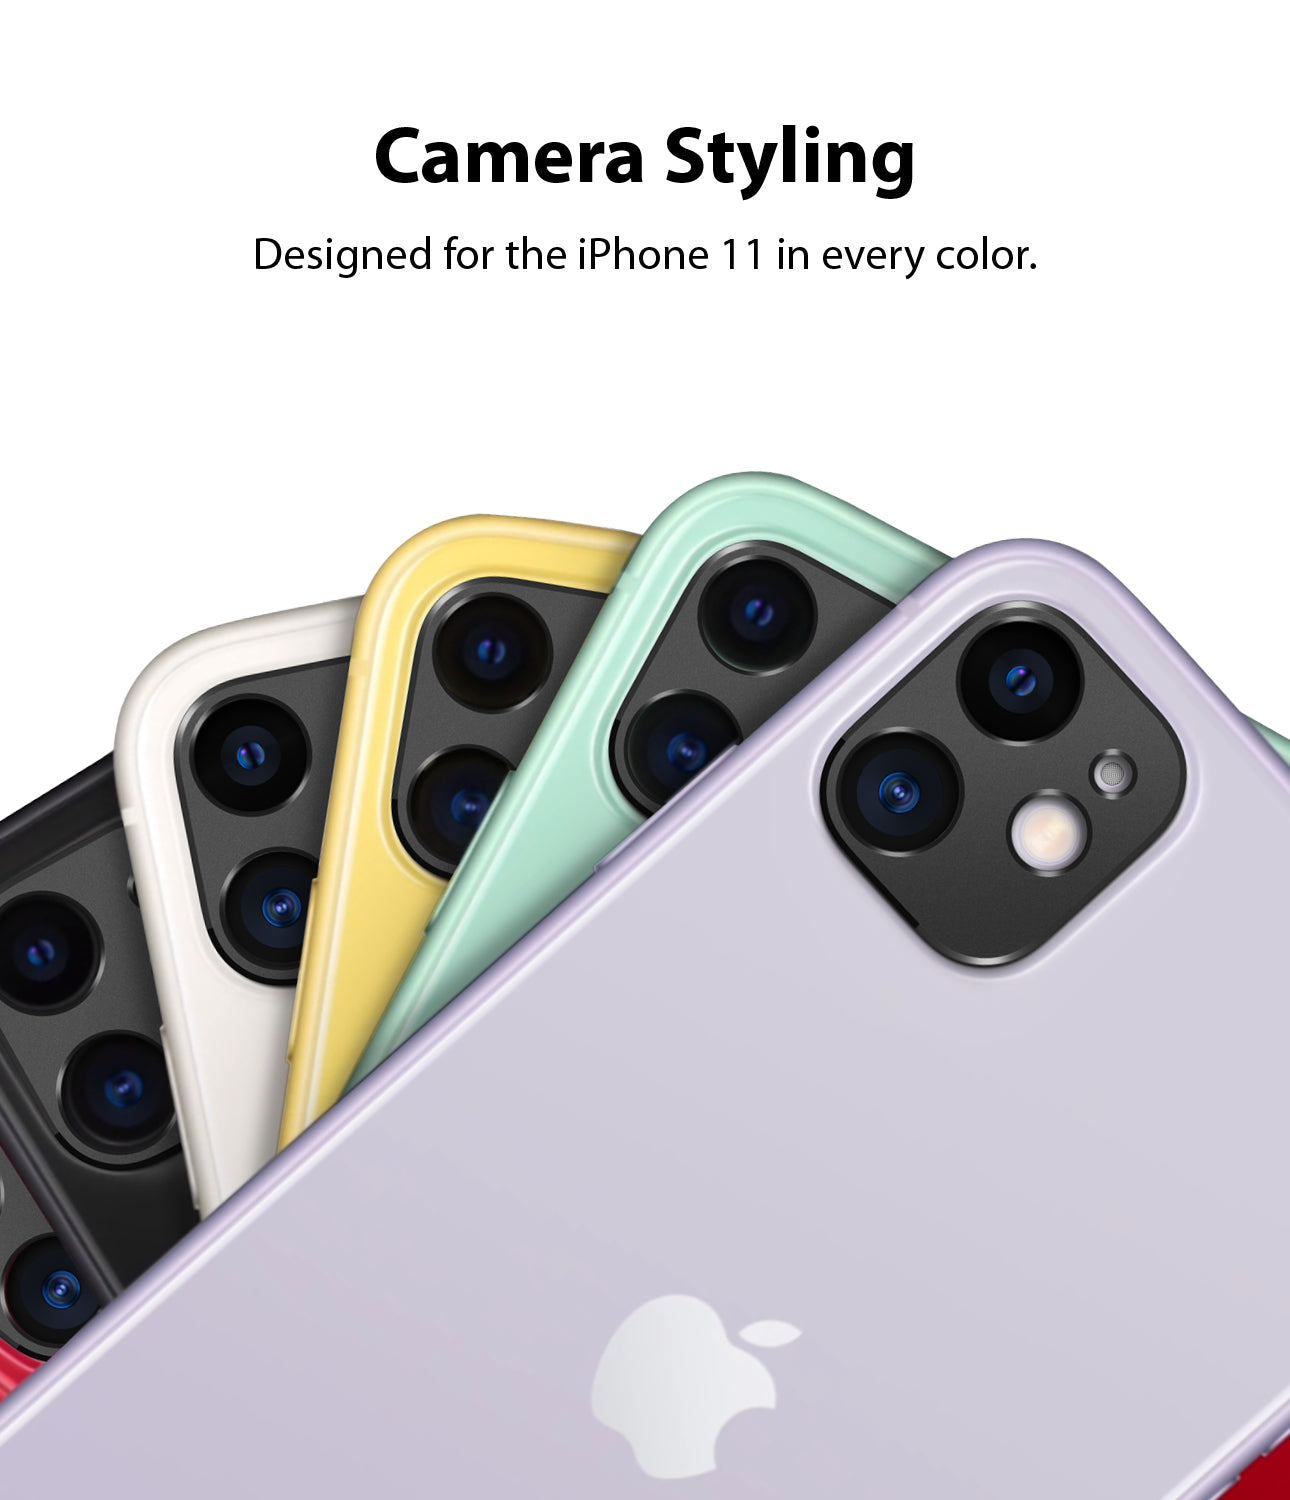 designed for every color of iphone 11